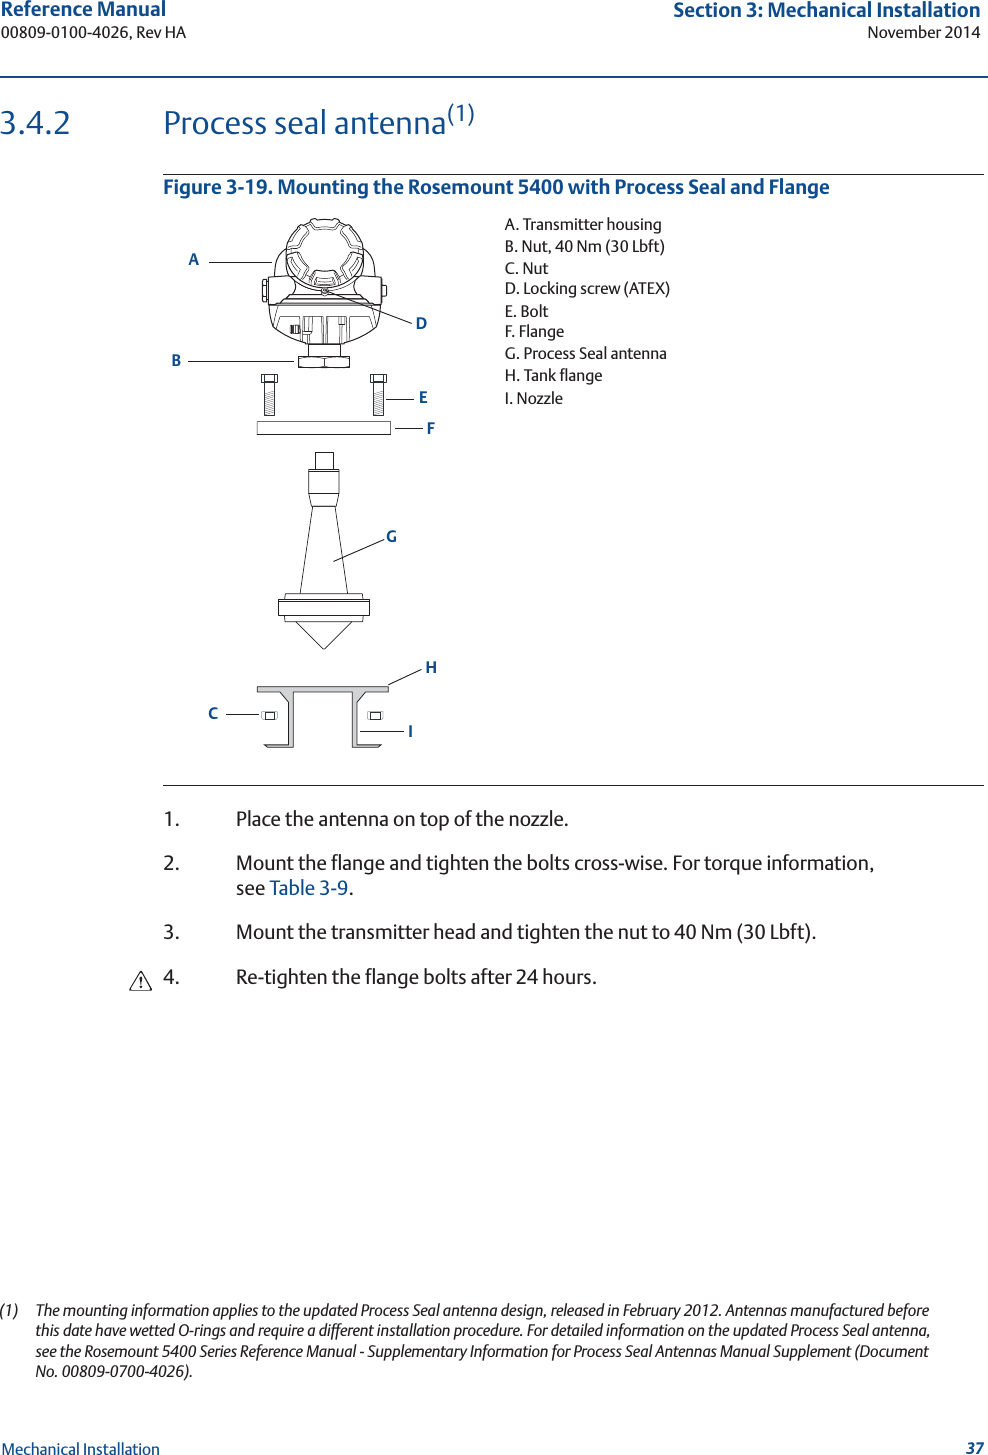 37Reference Manual 00809-0100-4026, Rev HASection 3: Mechanical InstallationNovember 2014Mechanical Installation3.4.2 Process seal antenna(1)Figure 3-19. Mounting the Rosemount 5400 with Process Seal and Flange1. Place the antenna on top of the nozzle.2. Mount the flange and tighten the bolts cross-wise. For torque information, see Table 3-9.3. Mount the transmitter head and tighten the nut to 40 Nm (30 Lbft).4. Re-tighten the flange bolts after 24 hours.(1) The mounting information applies to the updated Process Seal antenna design, released in February 2012. Antennas manufactured before this date have wetted O-rings and require a different installation procedure. For detailed information on the updated Process Seal antenna, see the Rosemount 5400 Series Reference Manual - Supplementary Information for Process Seal Antennas Manual Supplement (Document No. 00809-0700-4026).EFABDGHICA. Transmitter housingB. Nut, 40 Nm (30 Lbft)C. NutD. Locking screw (ATEX)E. BoltF. FlangeG. Process Seal antennaH. Tank flangeI. Nozzle